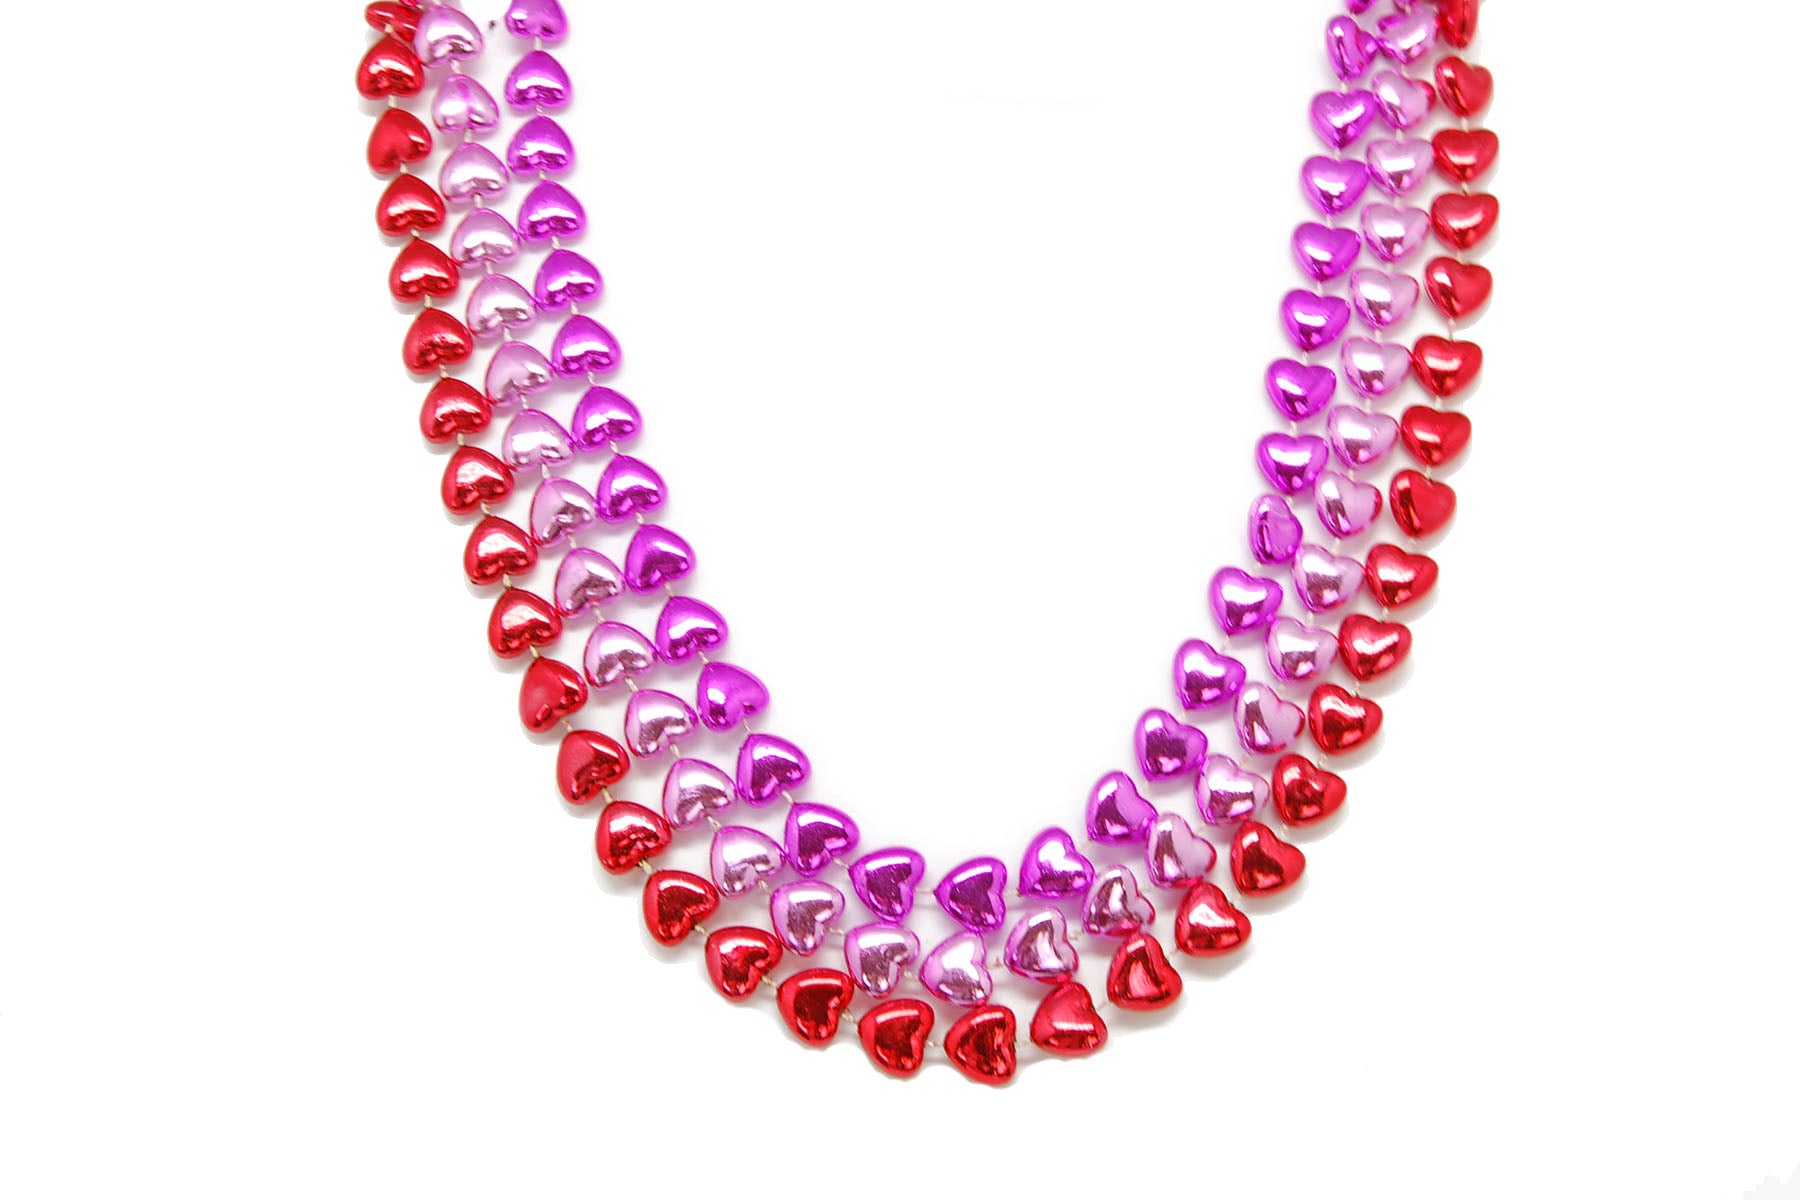 48 Pink and Red Heart Bead Mix - Toomey's Mardi Gras